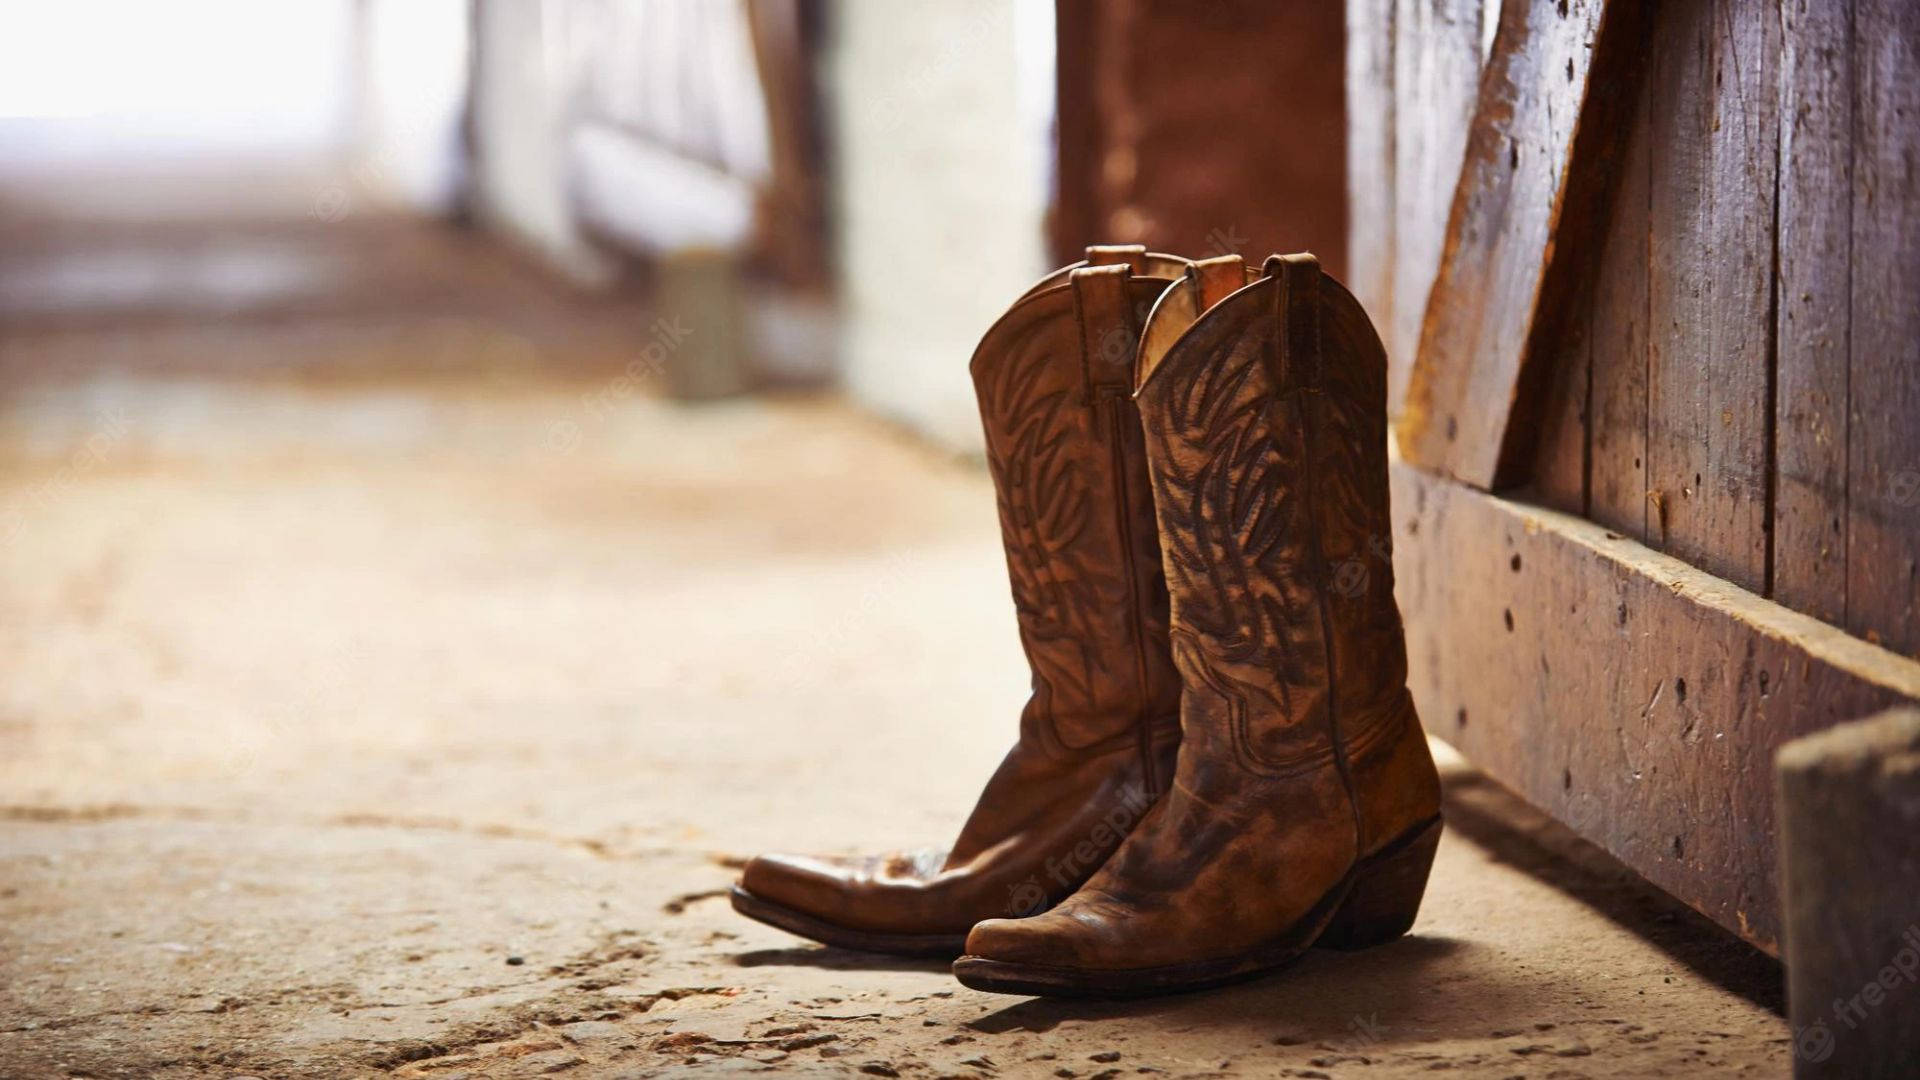 Cowgirl Boots Background